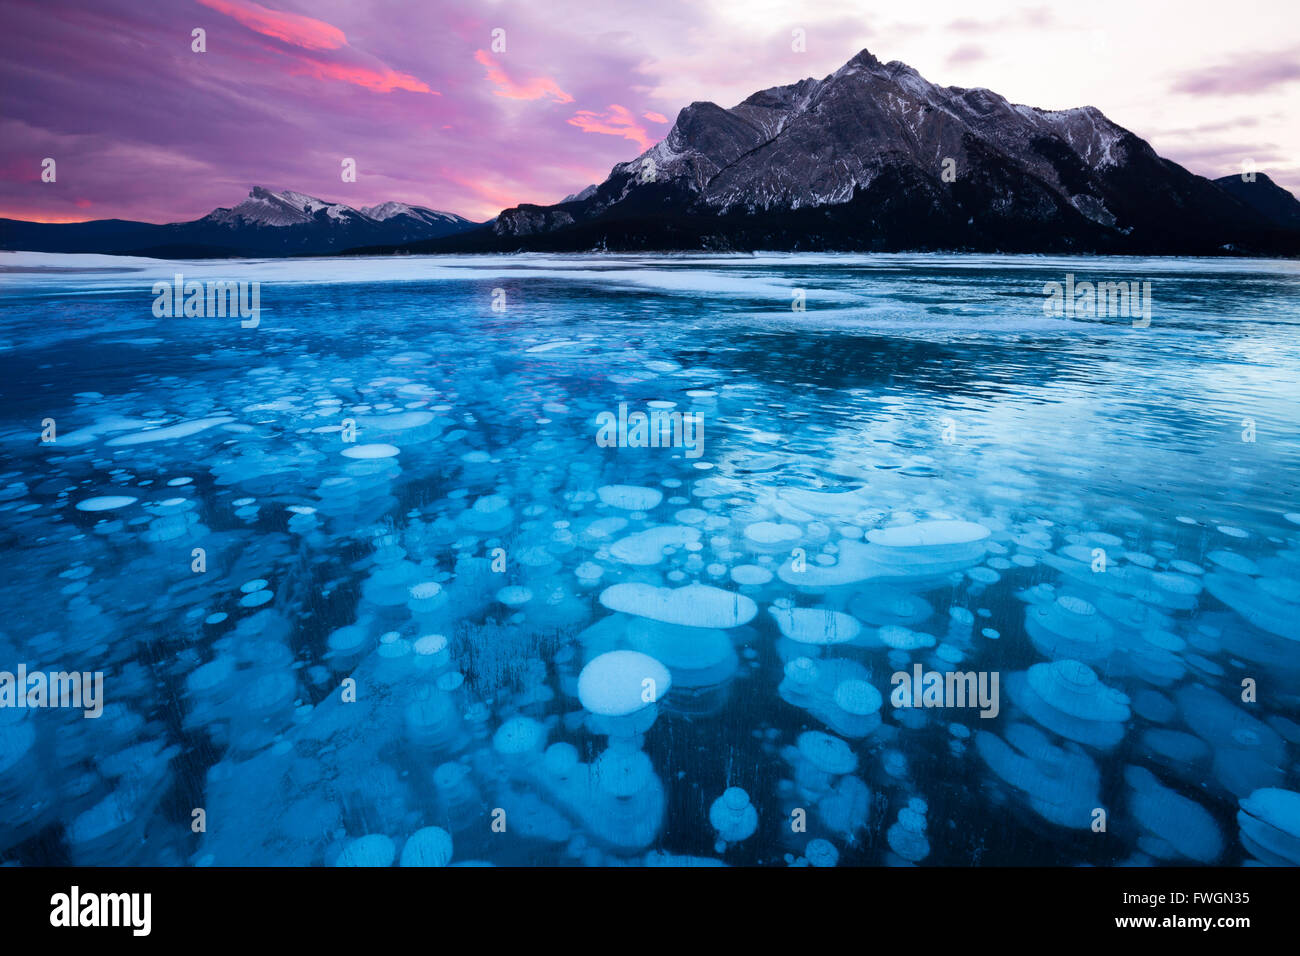 Bubbles and Cracks in the Ice with Mount Michener and Kista Peak in the Background at Sunrise, Abraham Lake, Alberta, Canada Stock Photo